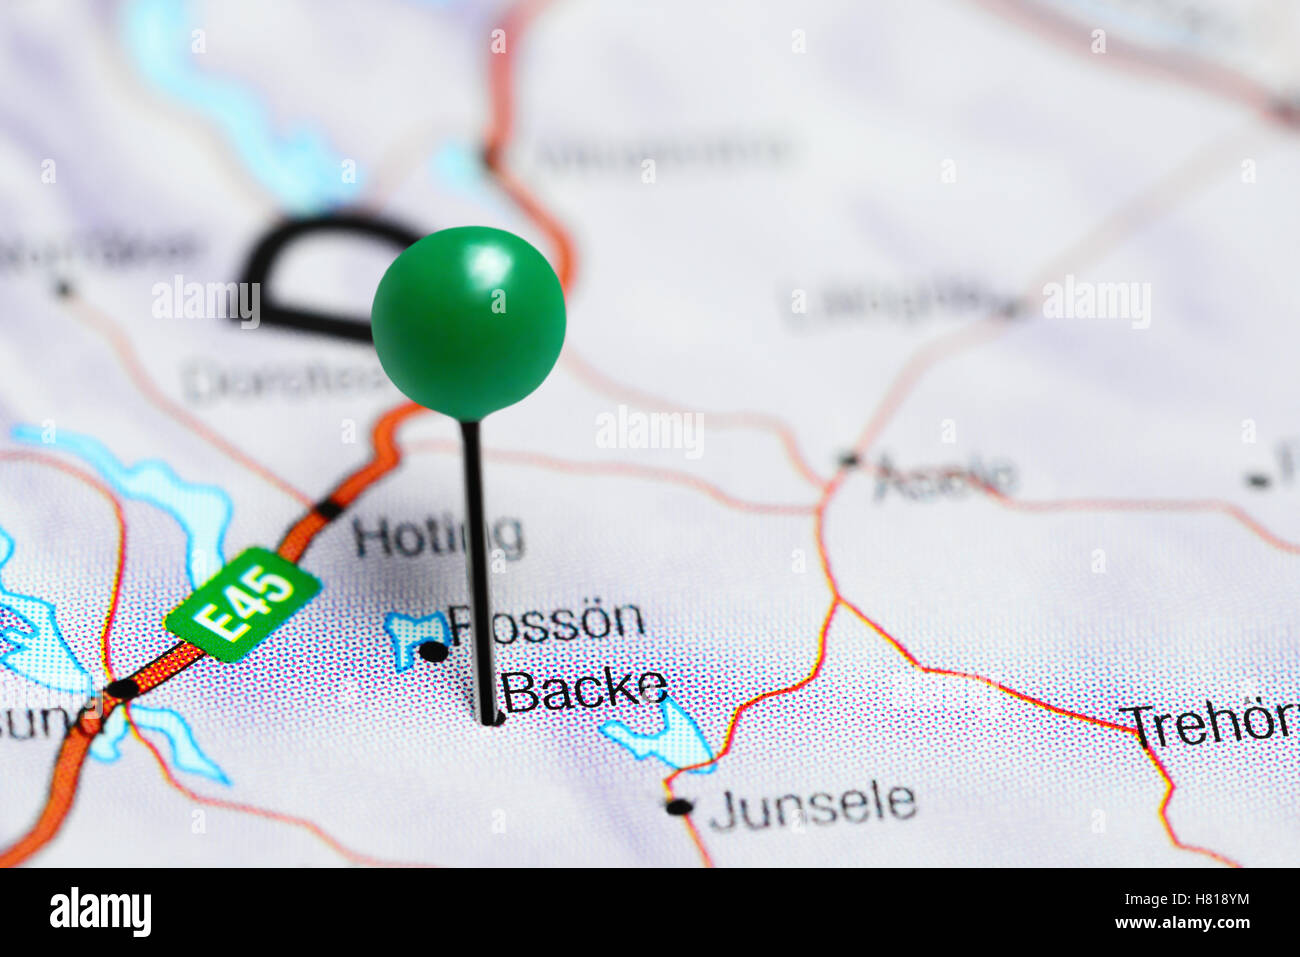 Backe pinned on a map of Sweden Stock Photo